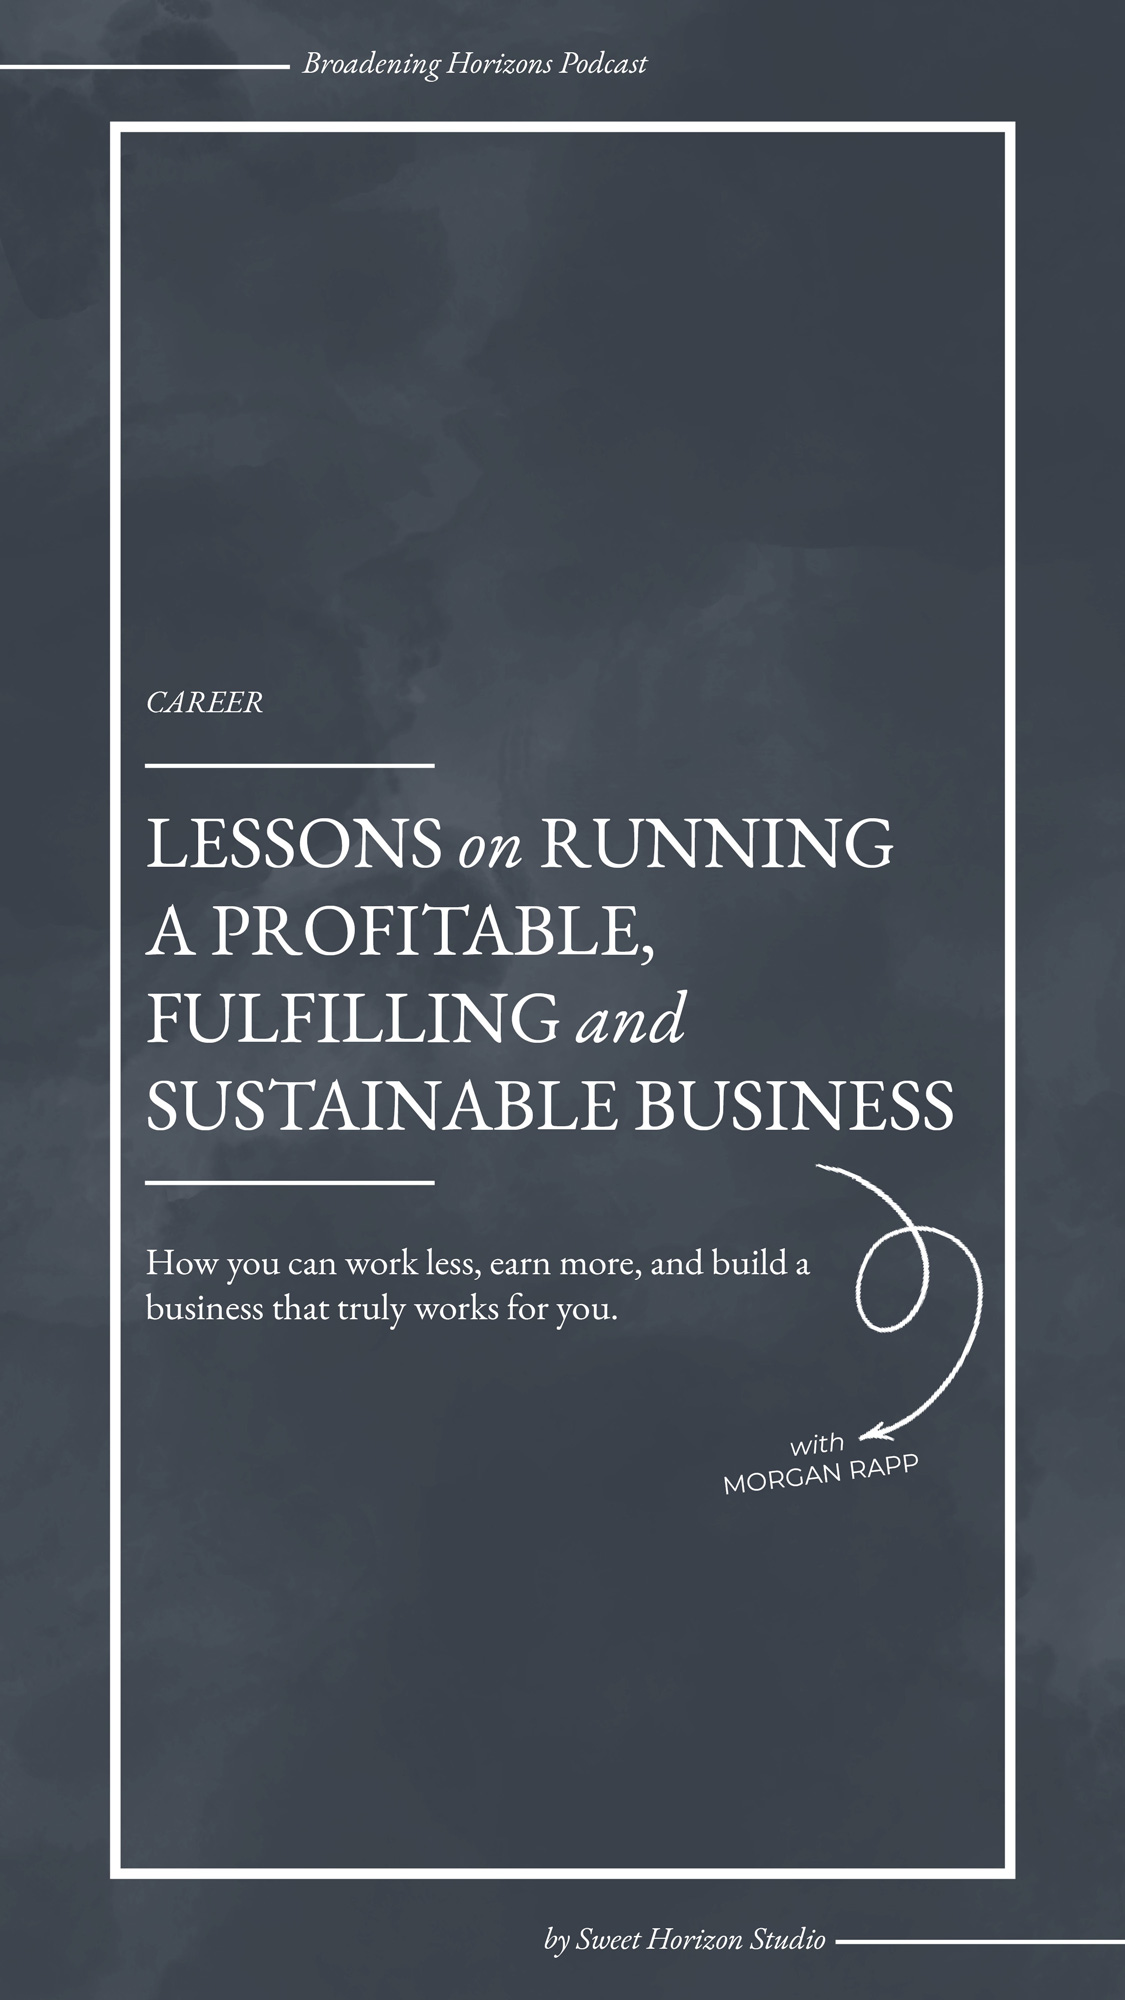 Lessons on Running a Profitable, Fulfilling, and Sustainable Business with Morgan Rapp from www.sweethorizonblog.com